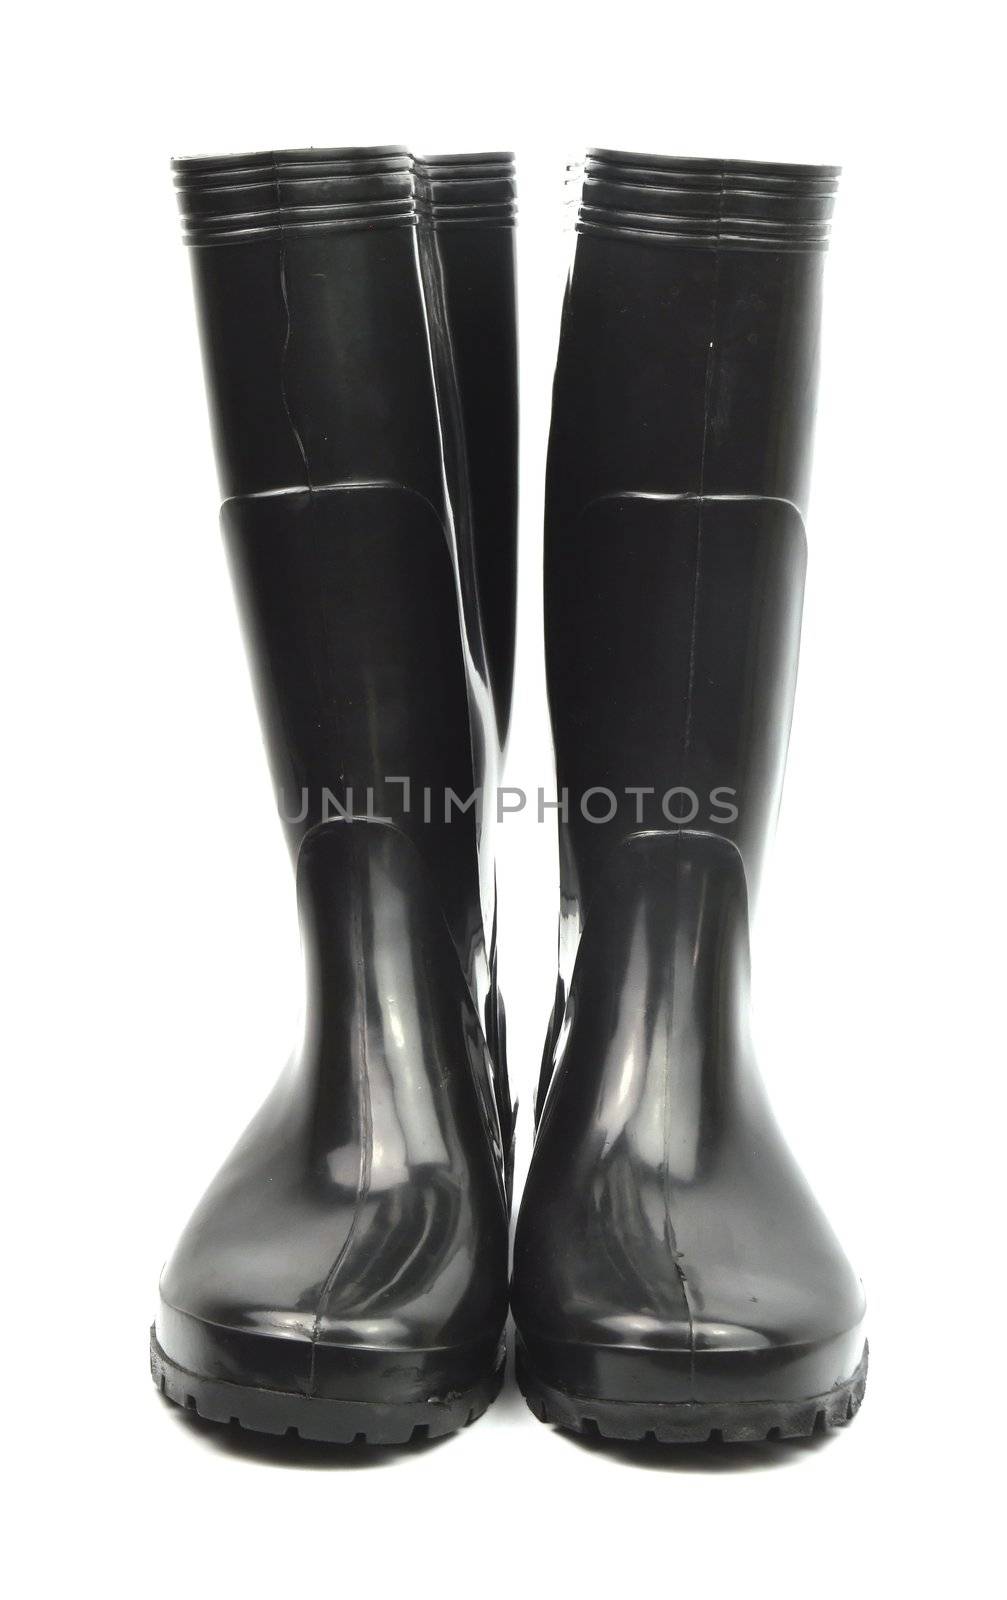 gum boots, photo on the white background 
